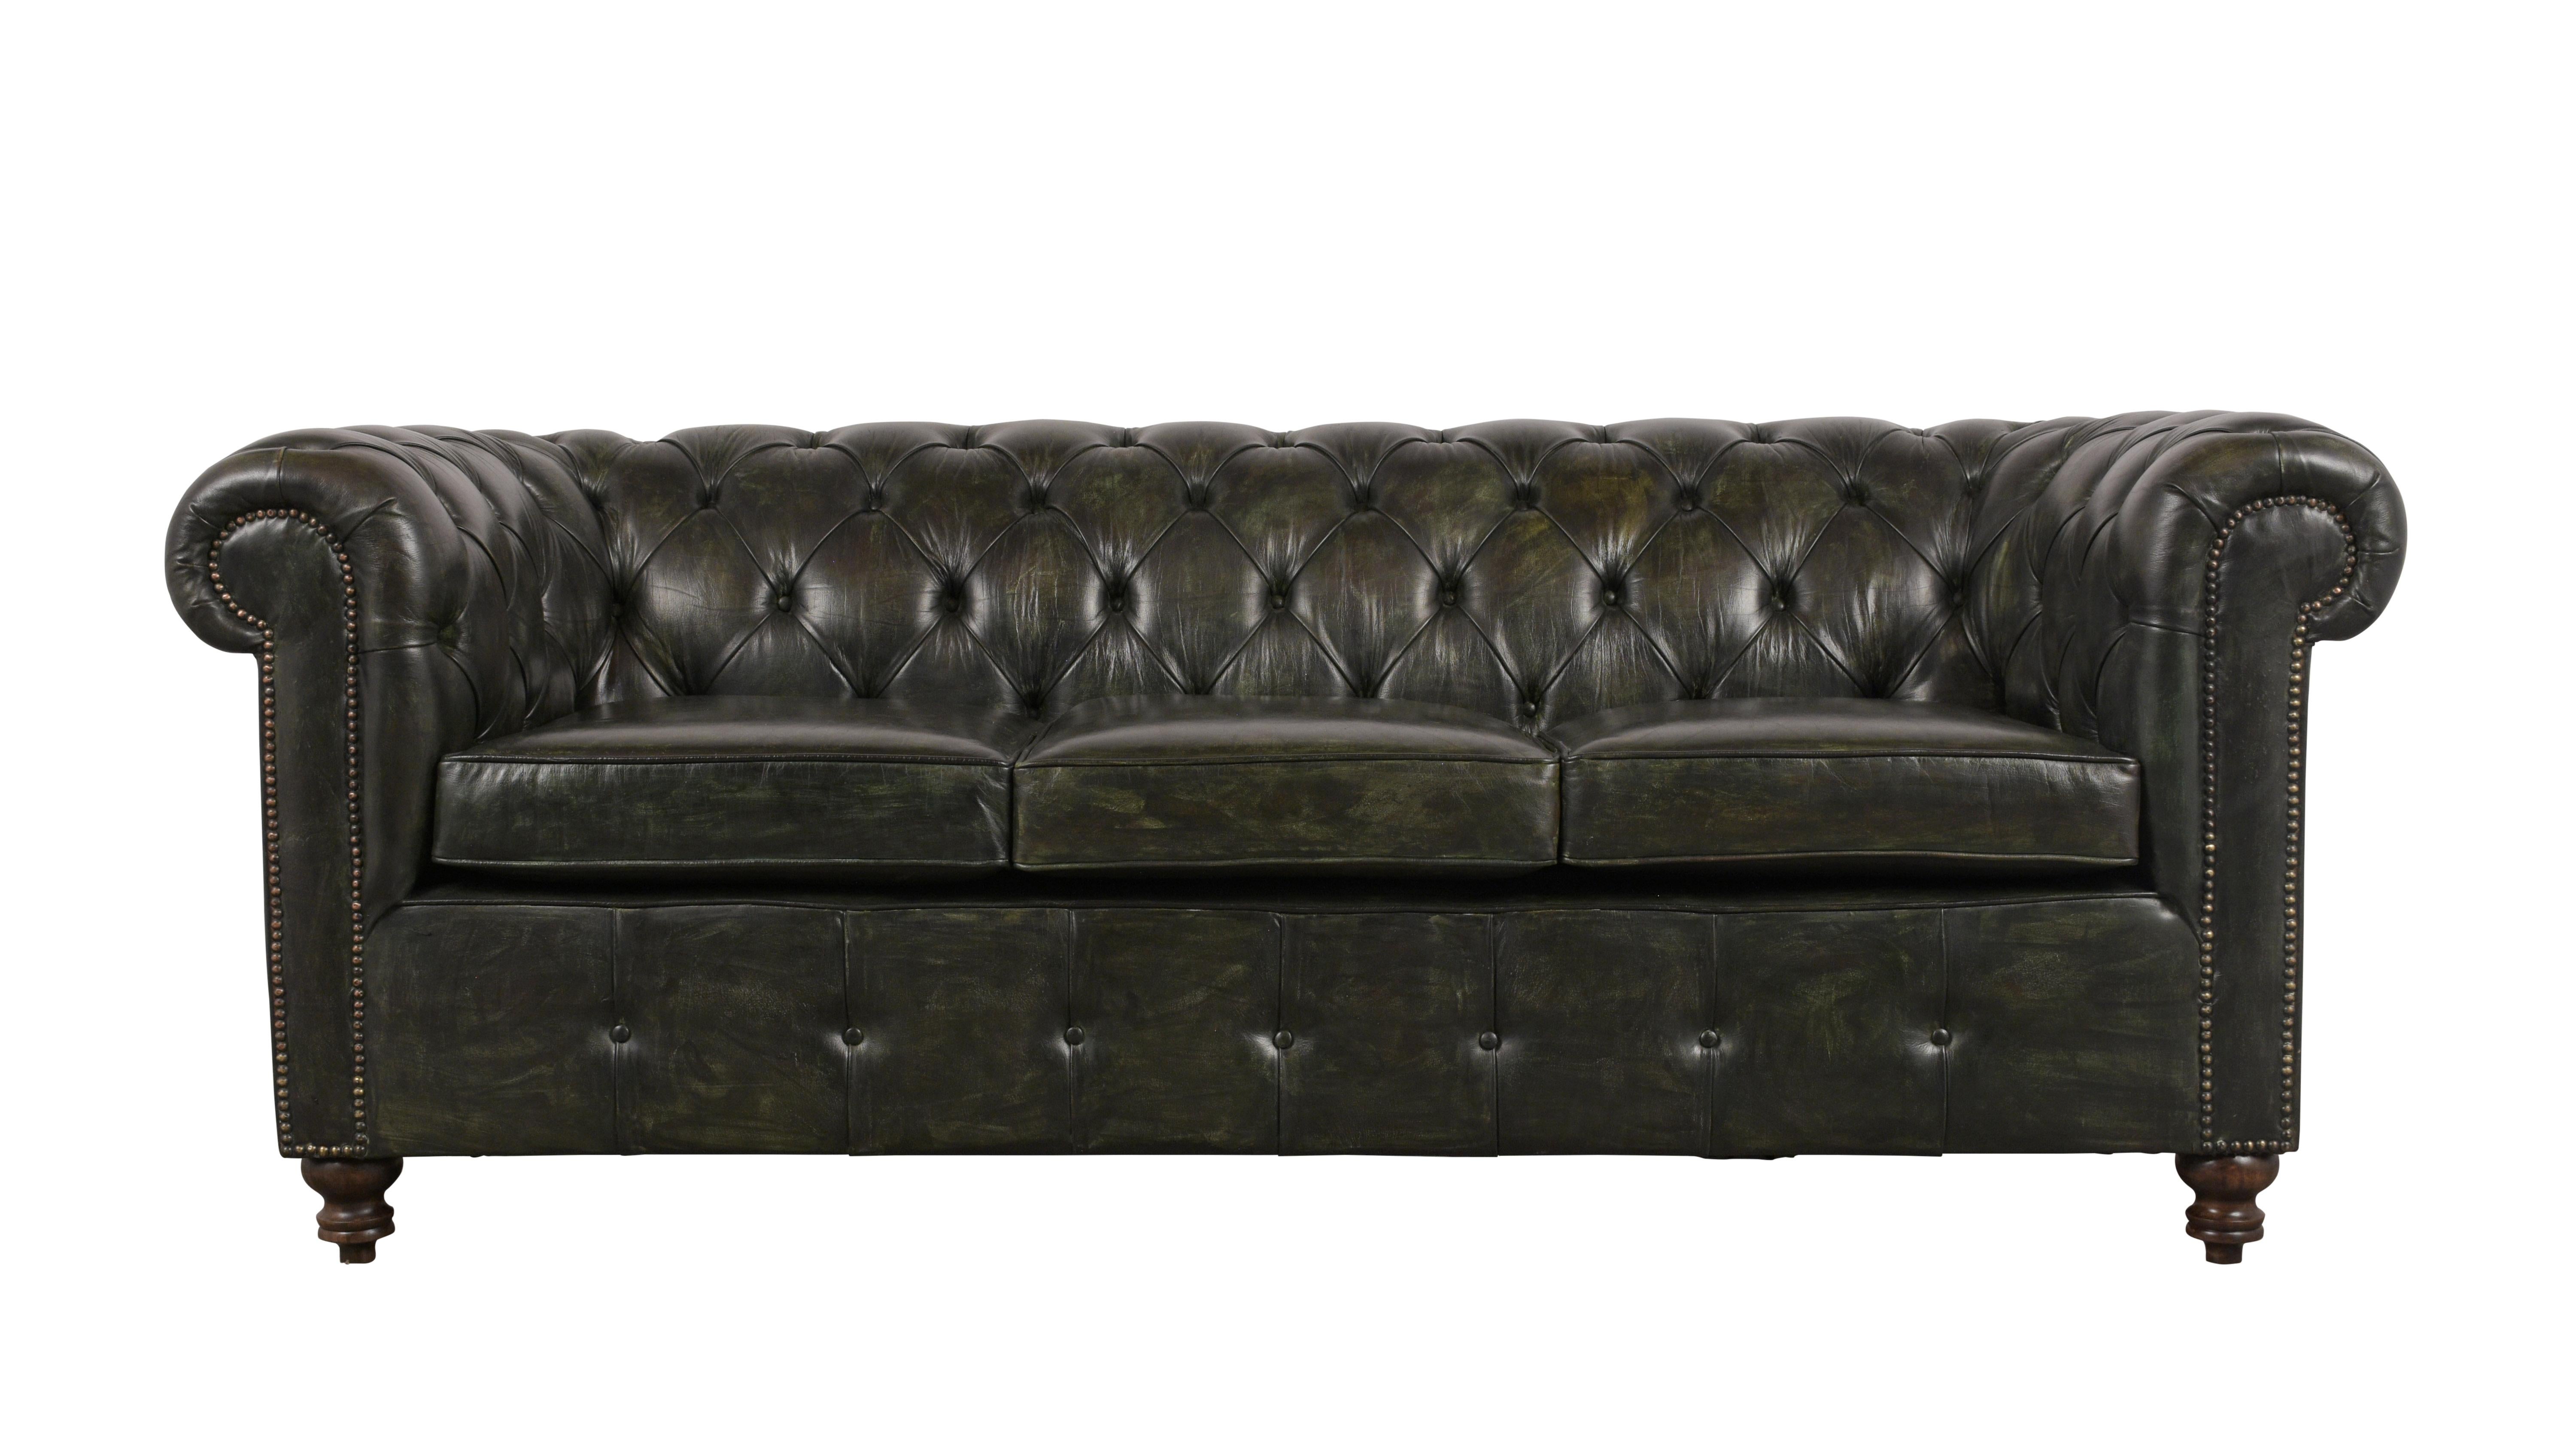 This English 1960s Chesterfield Leather Sofa has been restored and is upholstered in dark green leather with tufted design & brass nail trim details. The Sofa features three removable seats comfortable cushions and seat coil springs for support. The